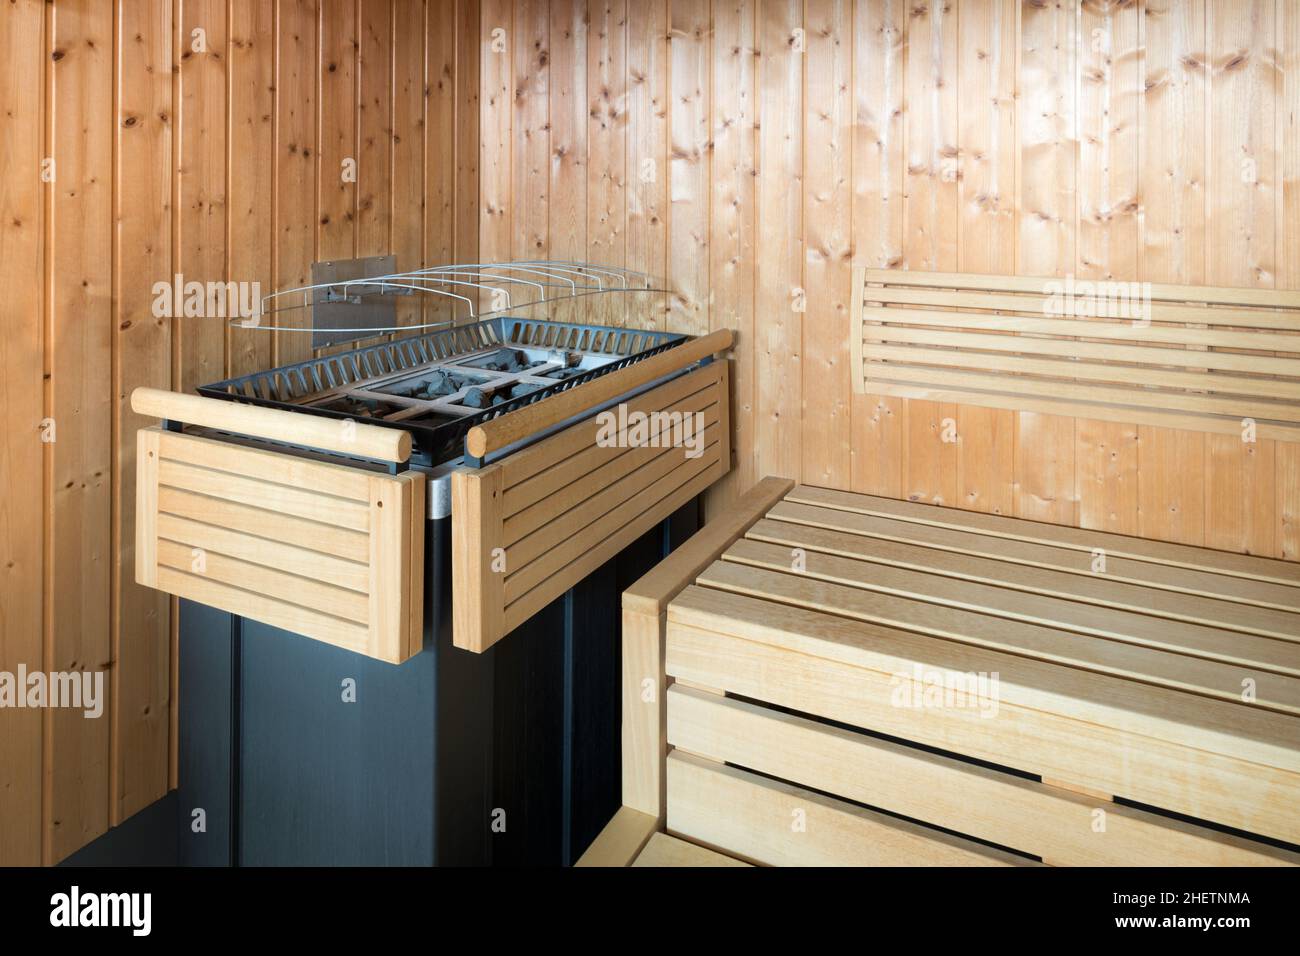 wooden steam sauna with protected stove Stock Photo